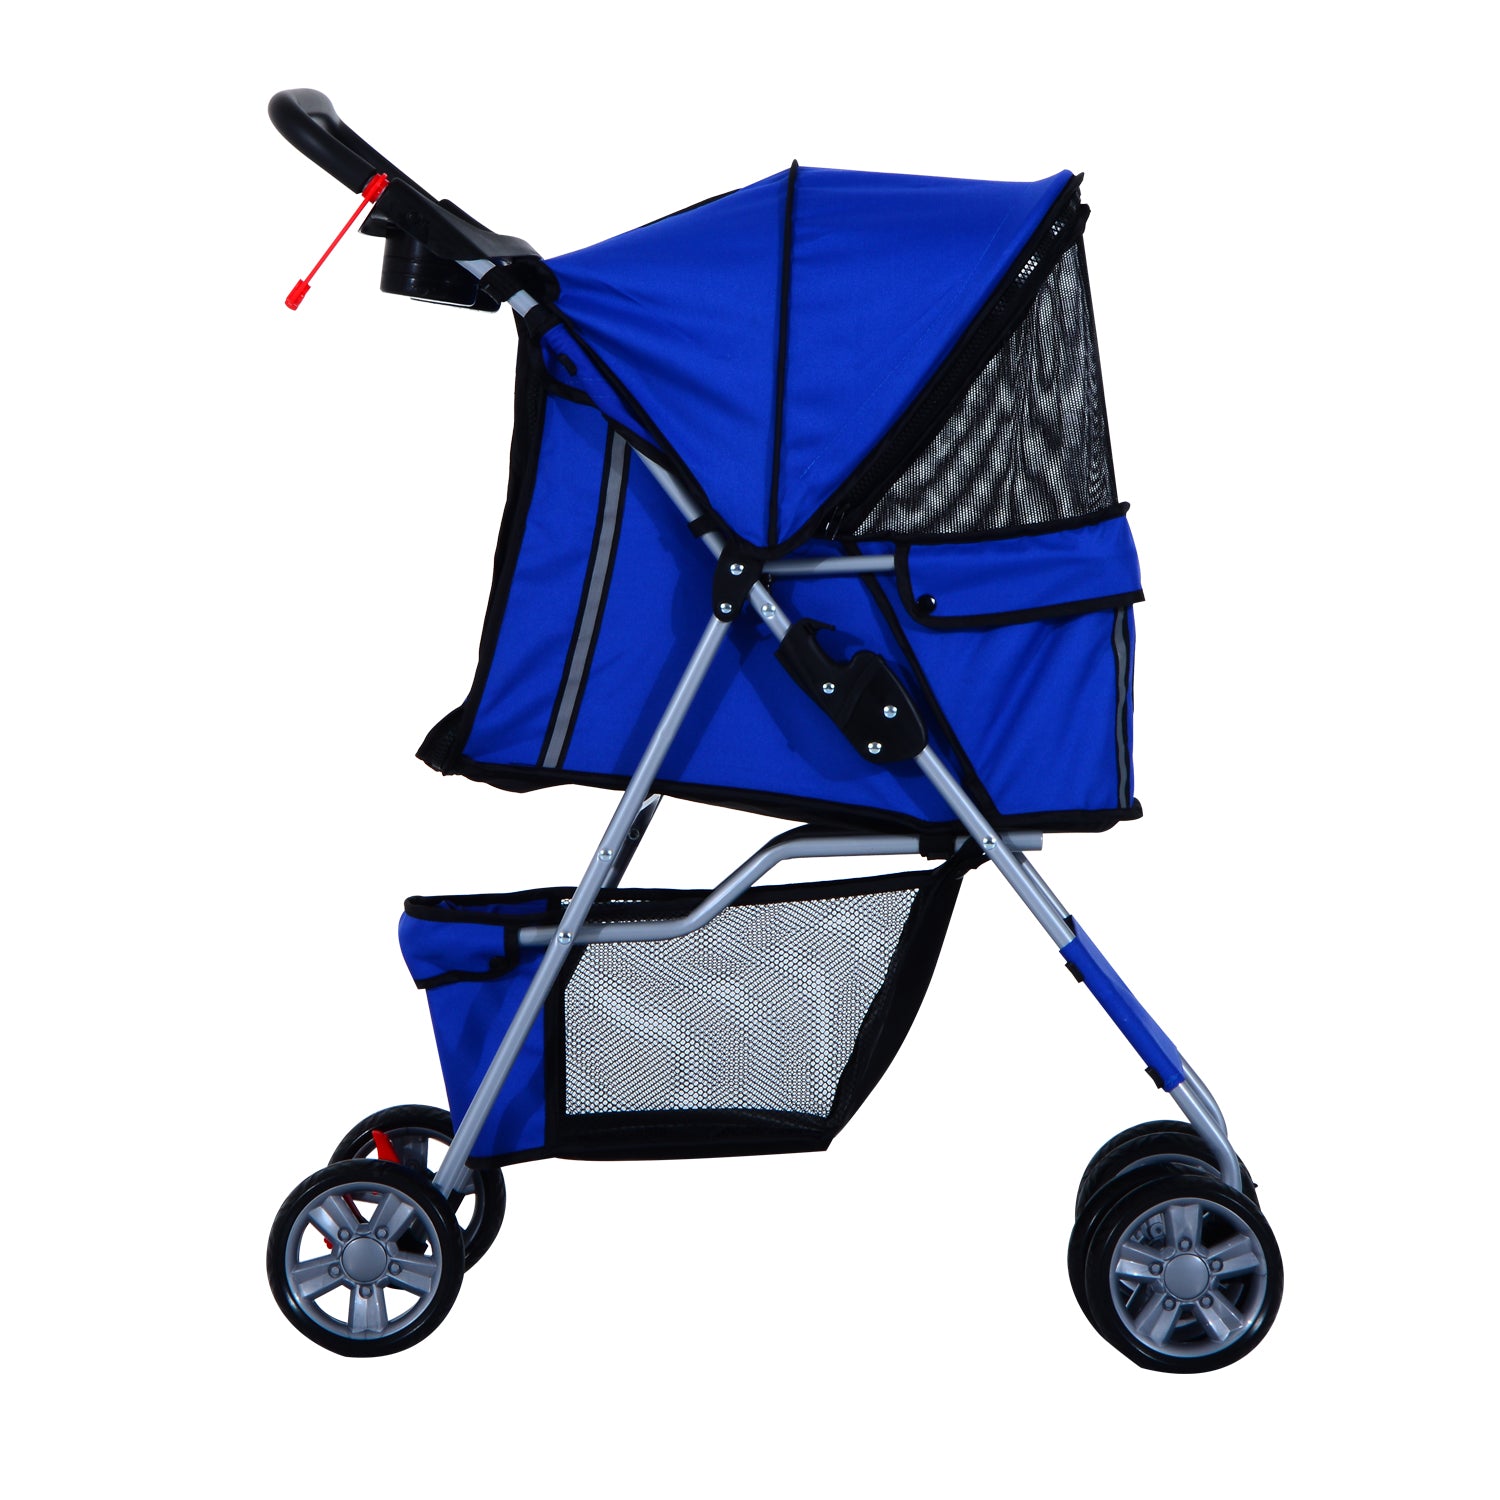 Dogs 600D Oxford Cloth Pram Blue - Suitable for Small Pets